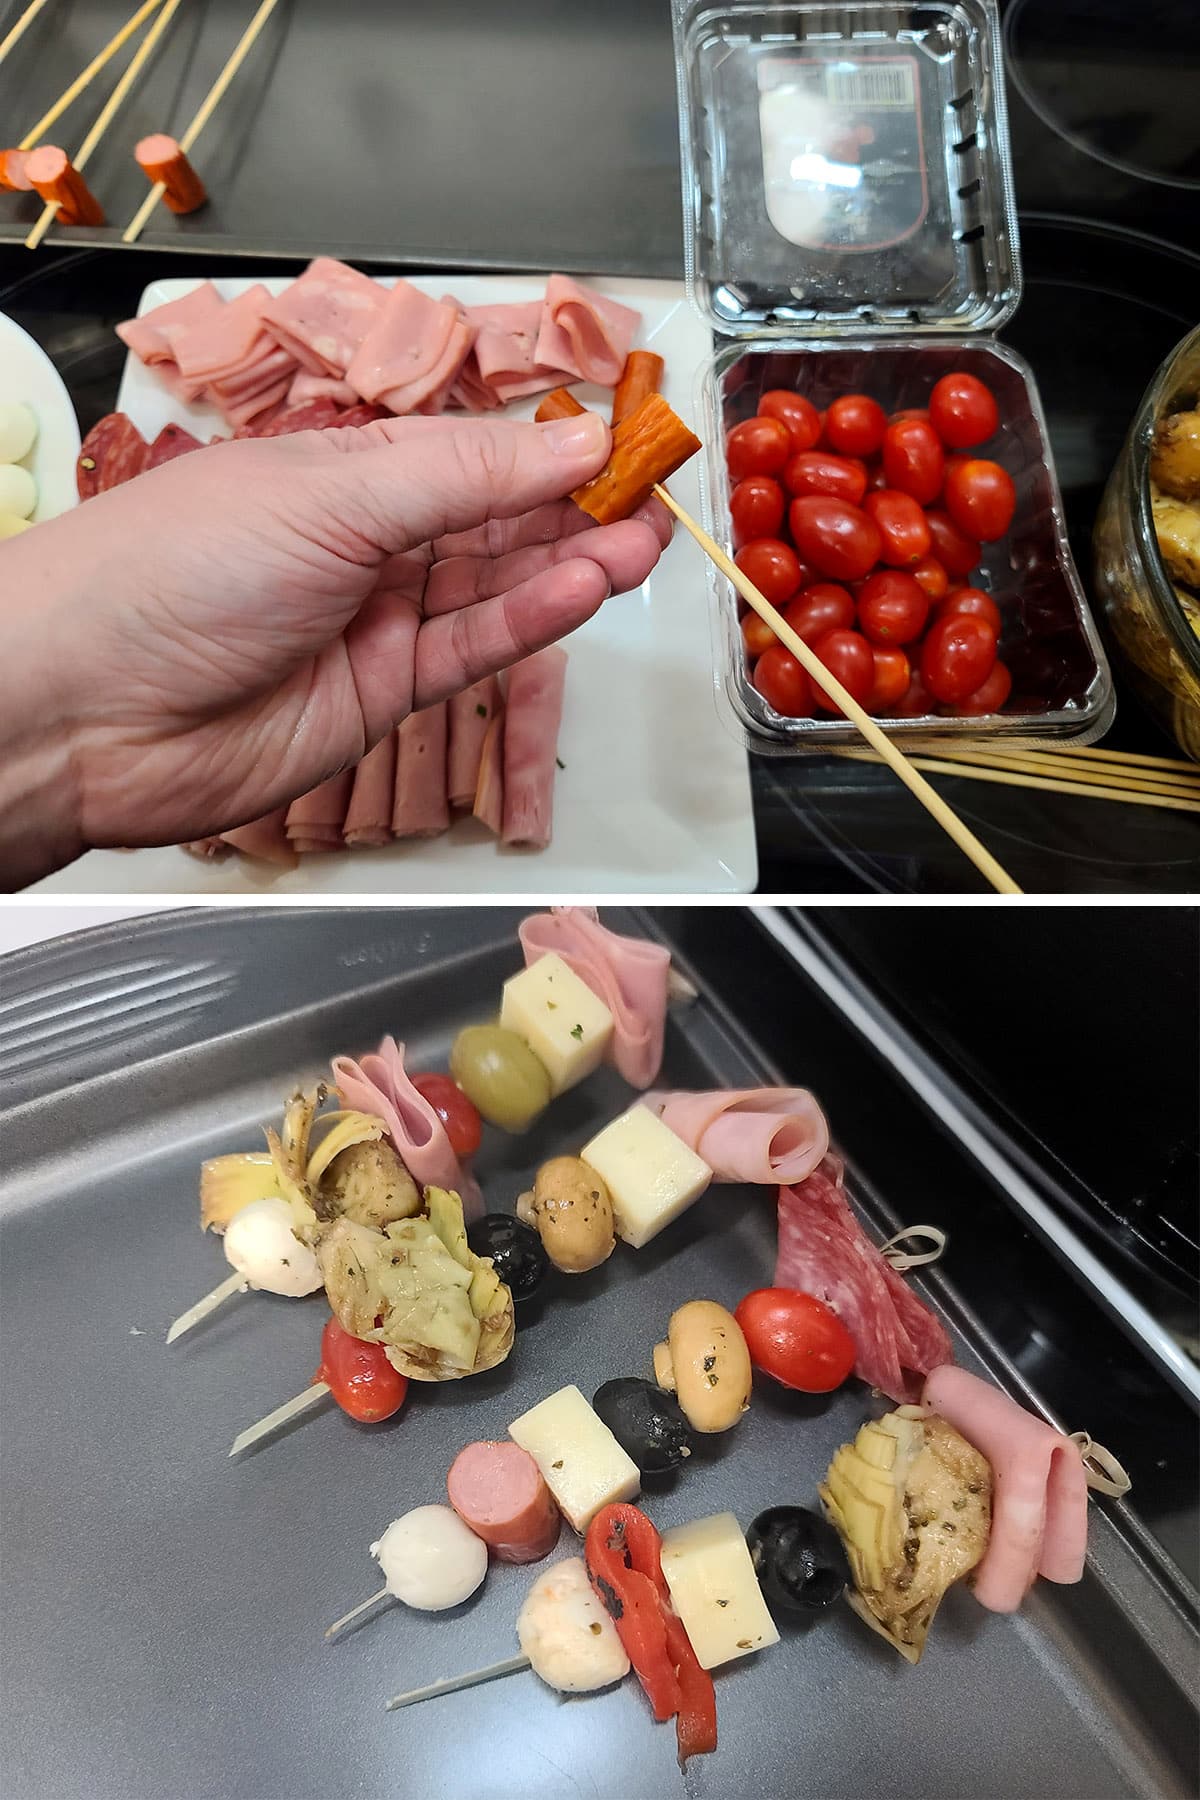 A 2 part image showing a hand threading a piece of pepperoni stick on a skewer, and several finished skewers on a baking pan.